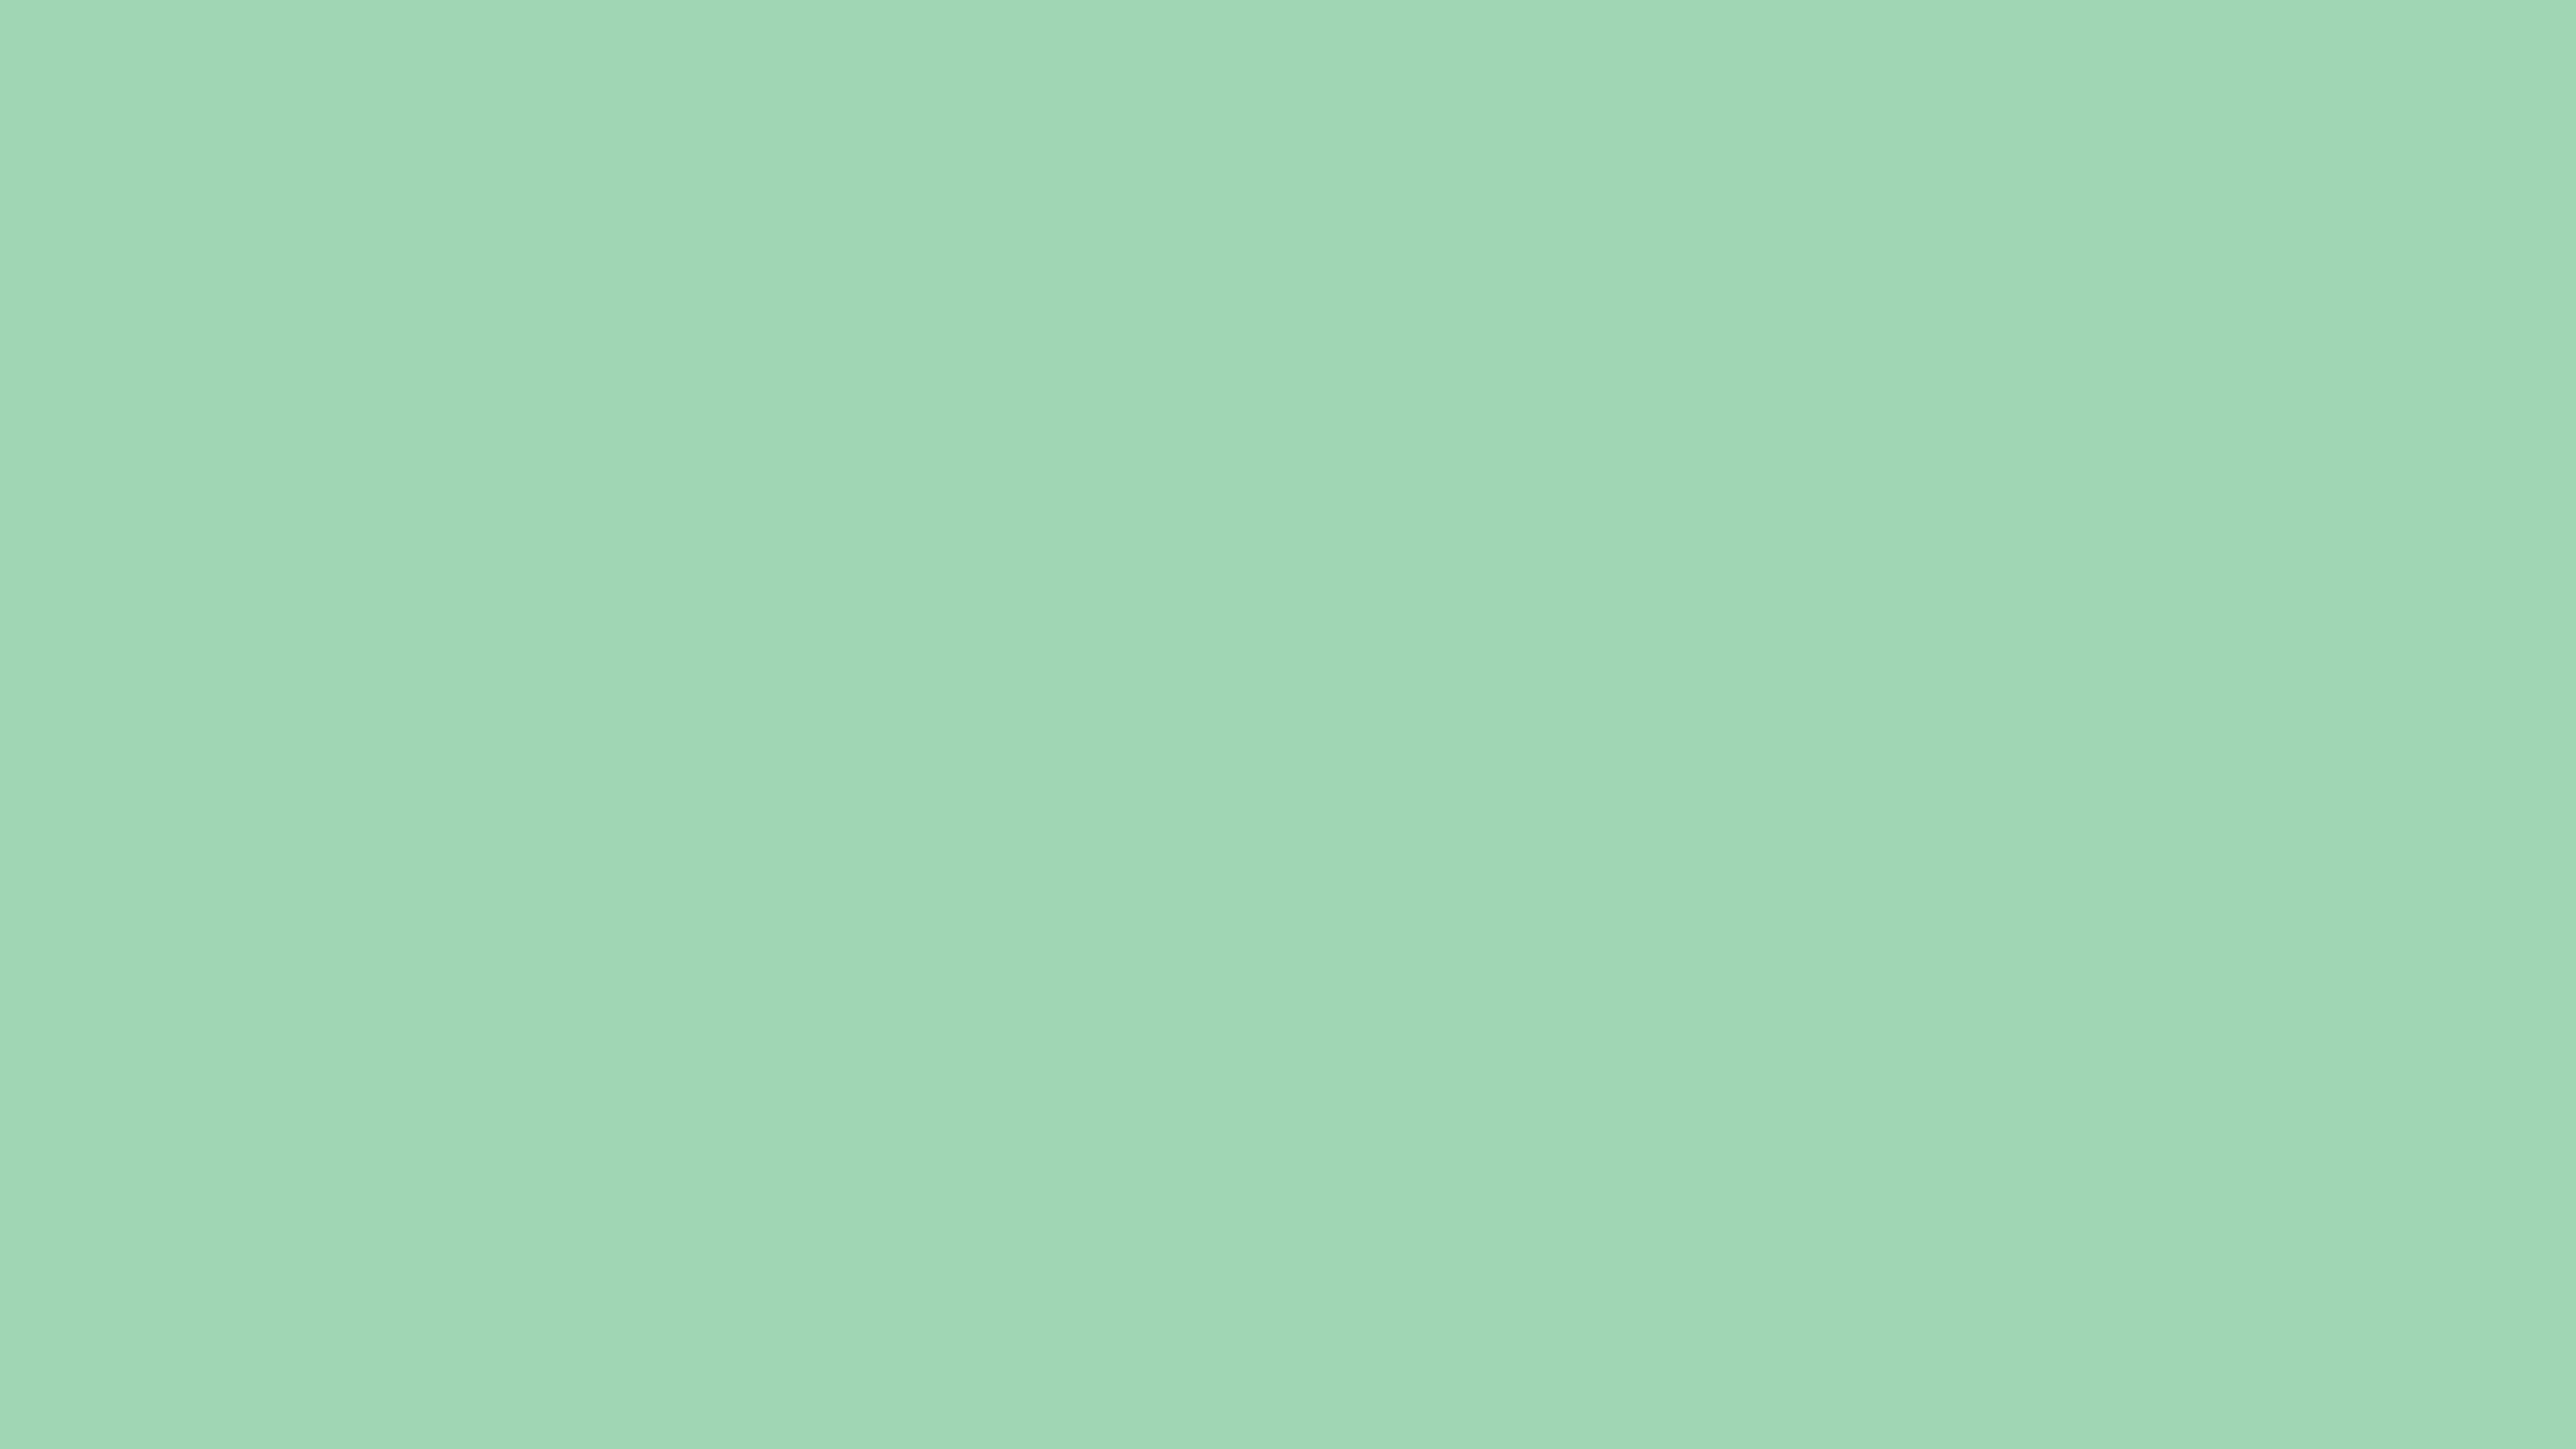 3840x2160 Turquoise Green Solid Color Background